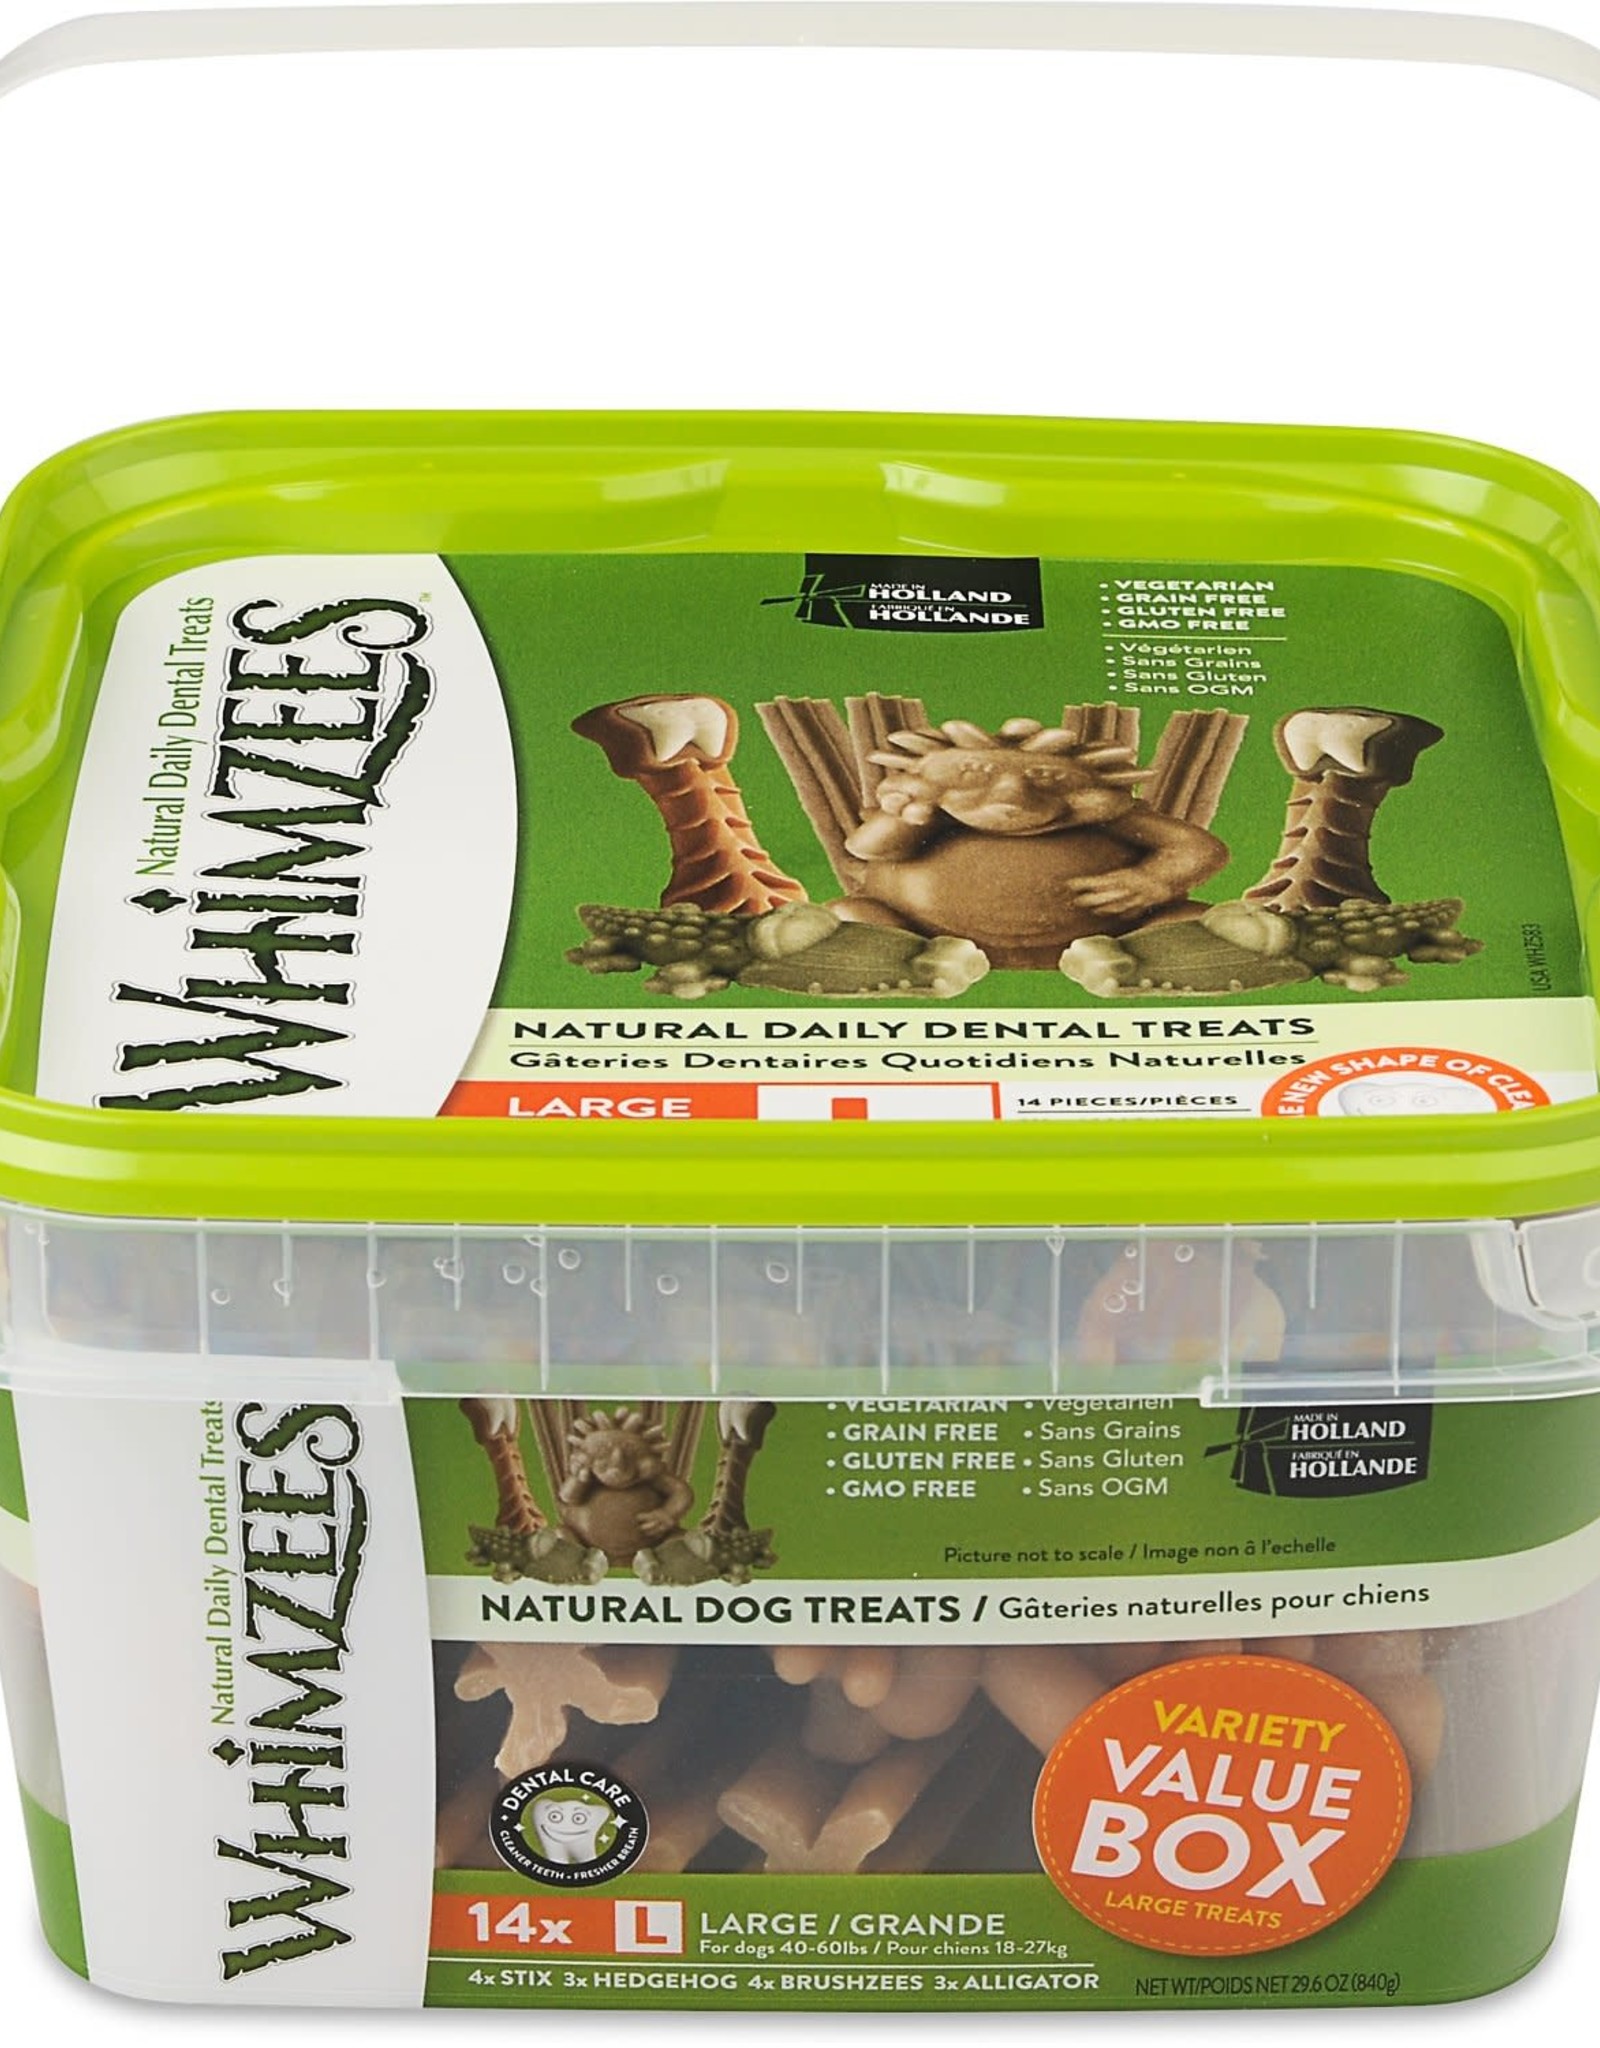 WELLPET Whimzees Variety Pack Dental Dog Treats